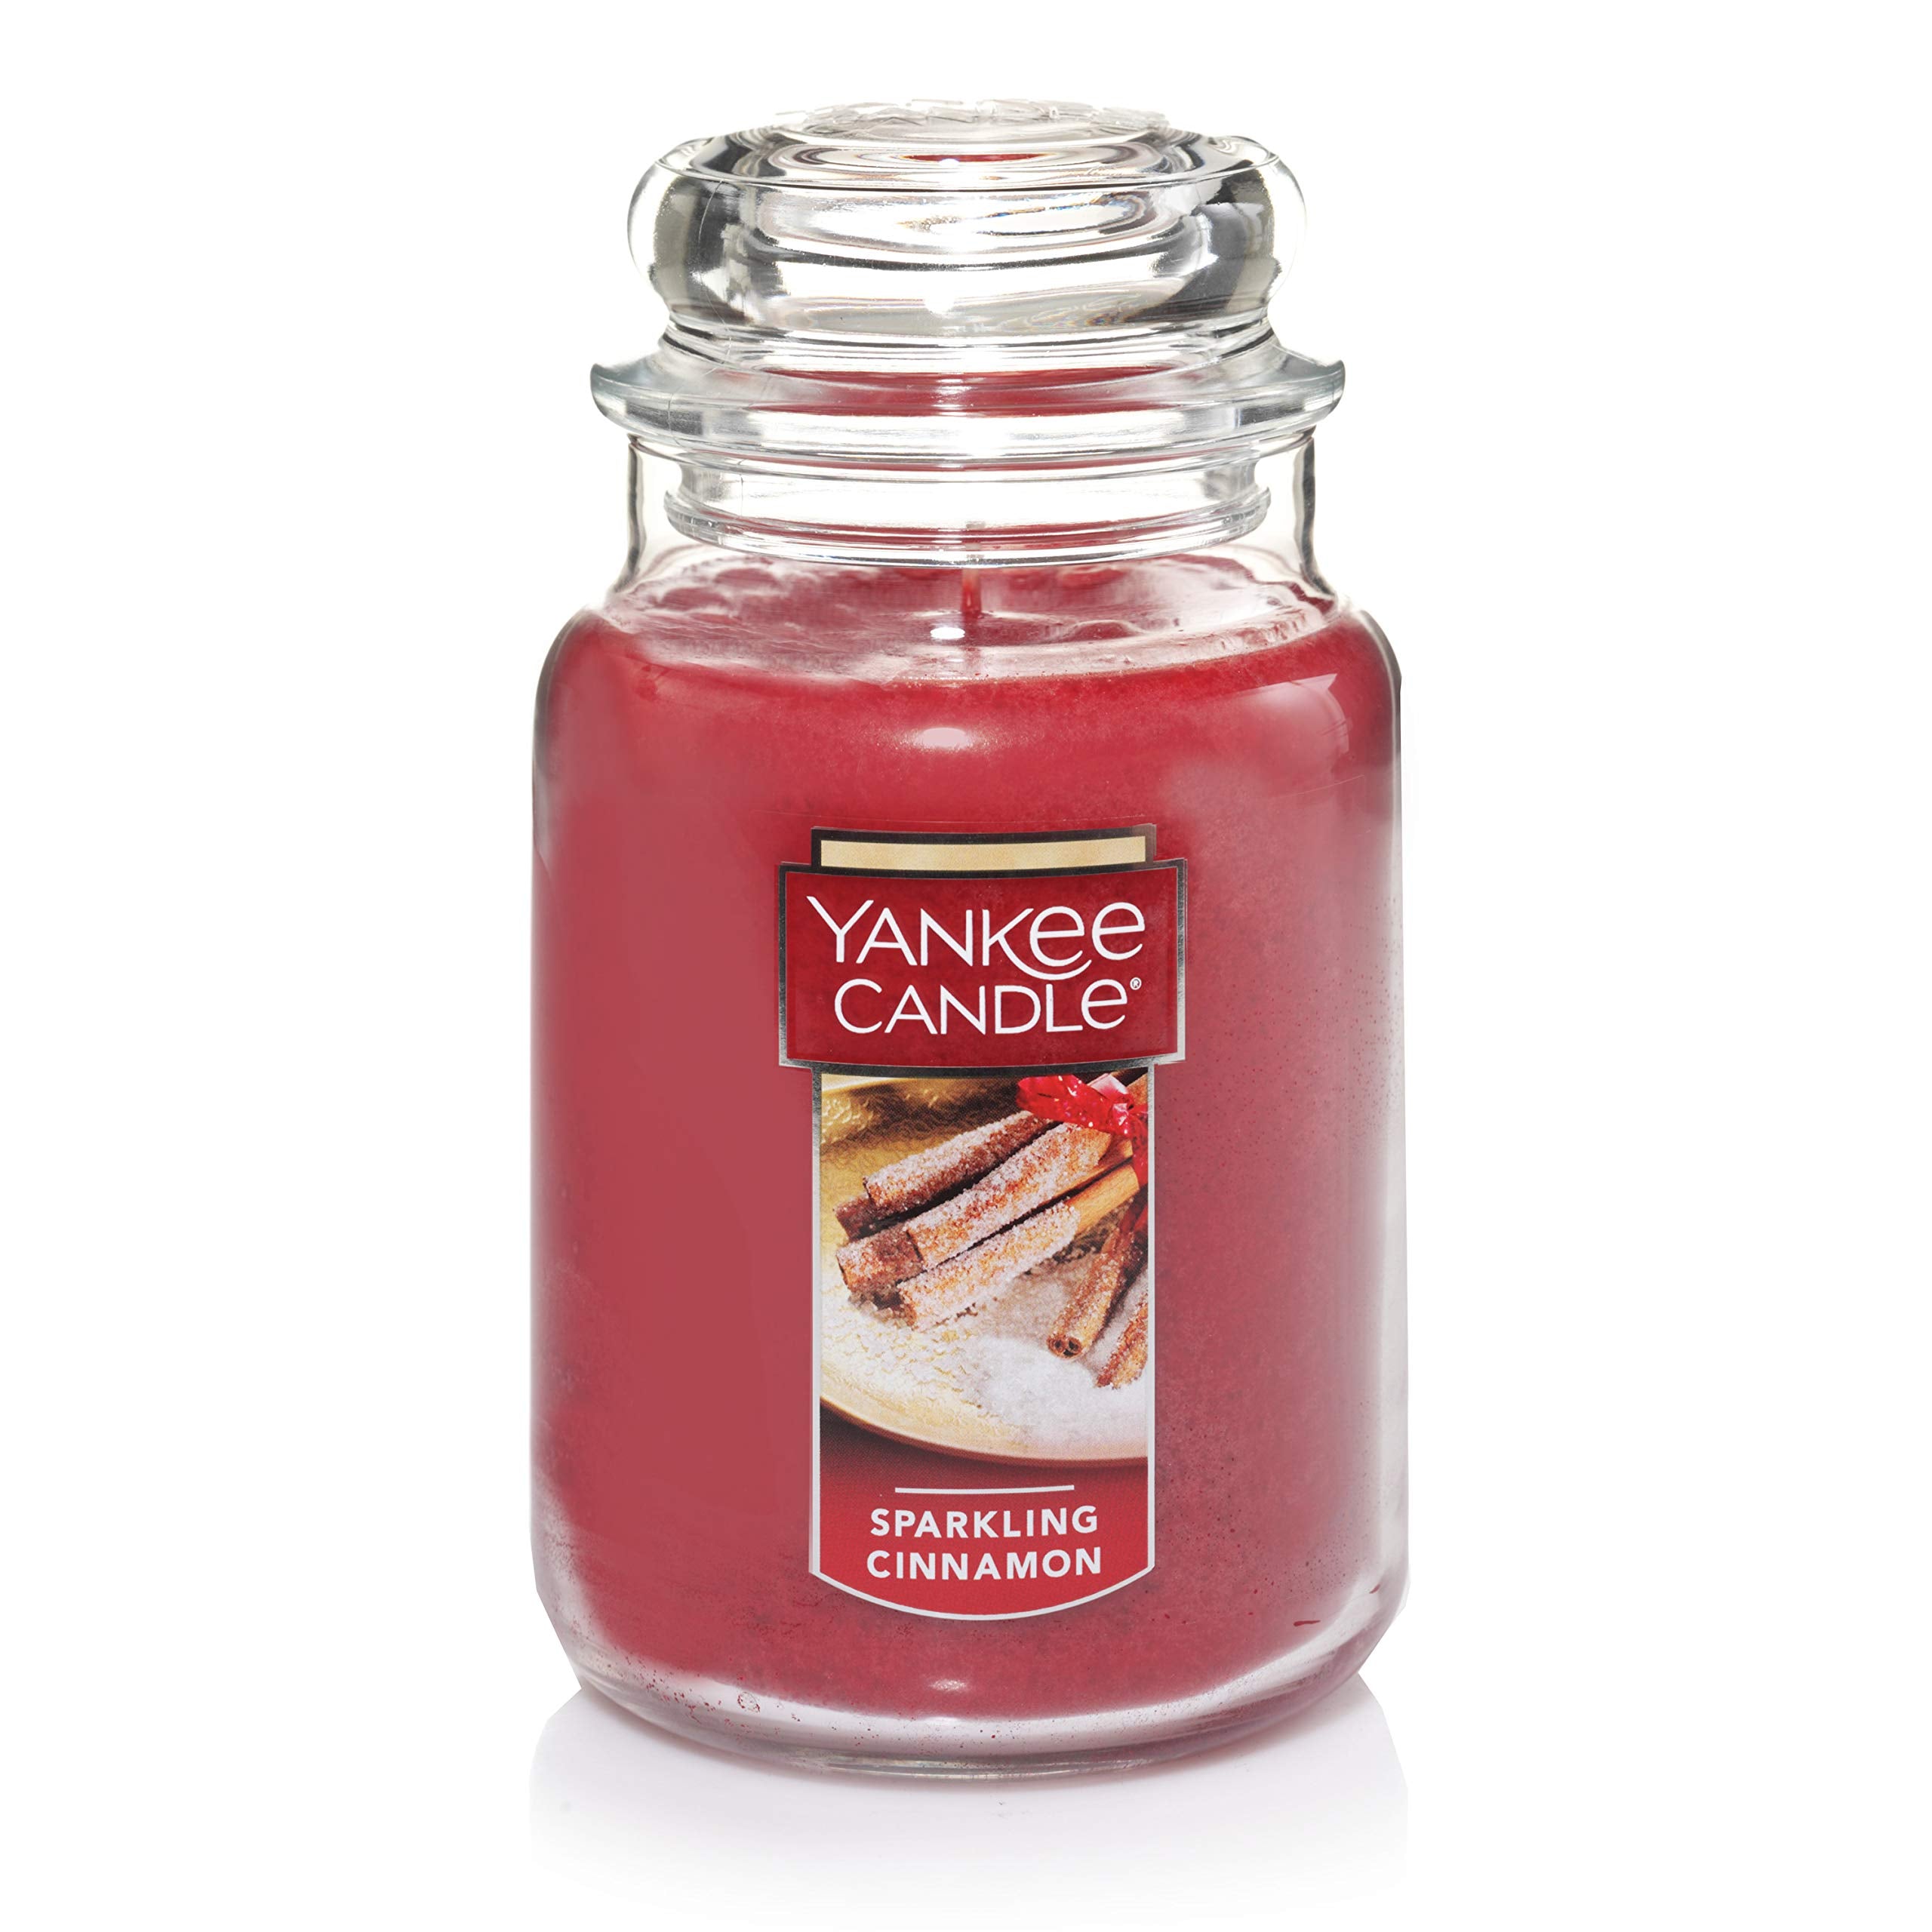 Yankee Candle Sparkling Cinnamon Scented, Classic 22oz Large Jar Single Wick Candle, Over 110 Hours of Burn Time | Holiday Gifts for All